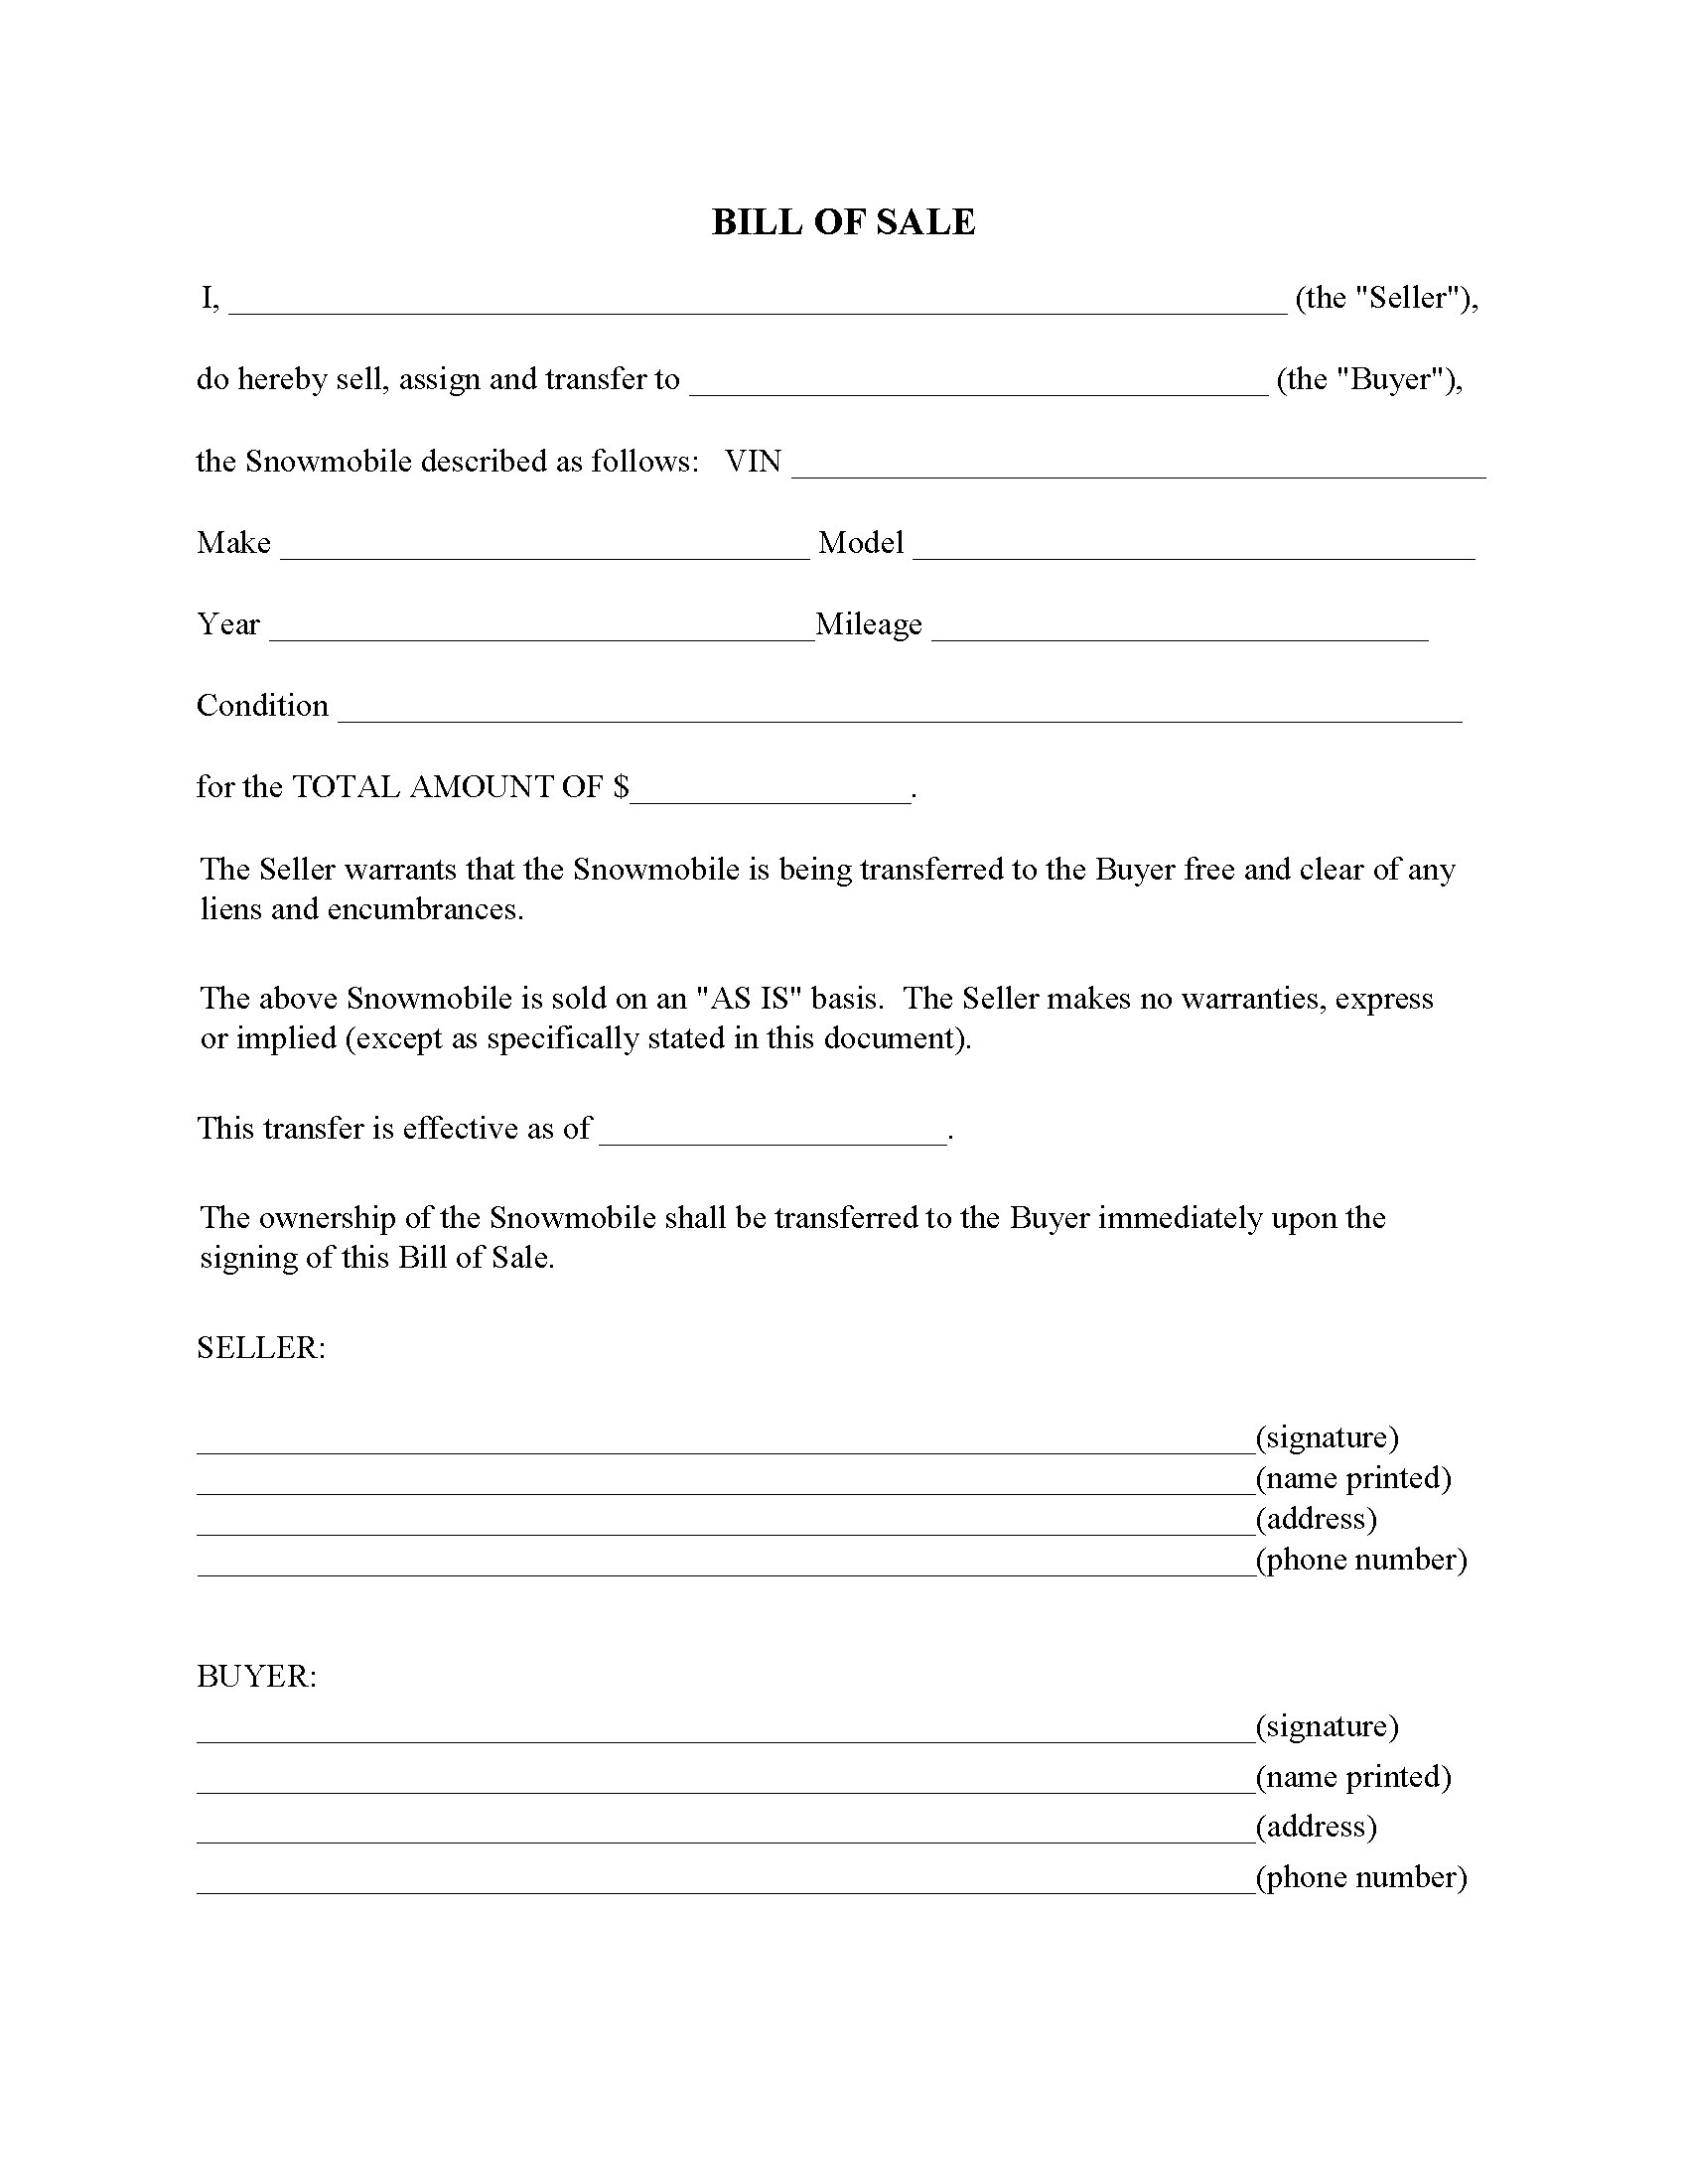 Snowmobile Bill of Sale Form Fillable PDF Free Printable Legal Forms